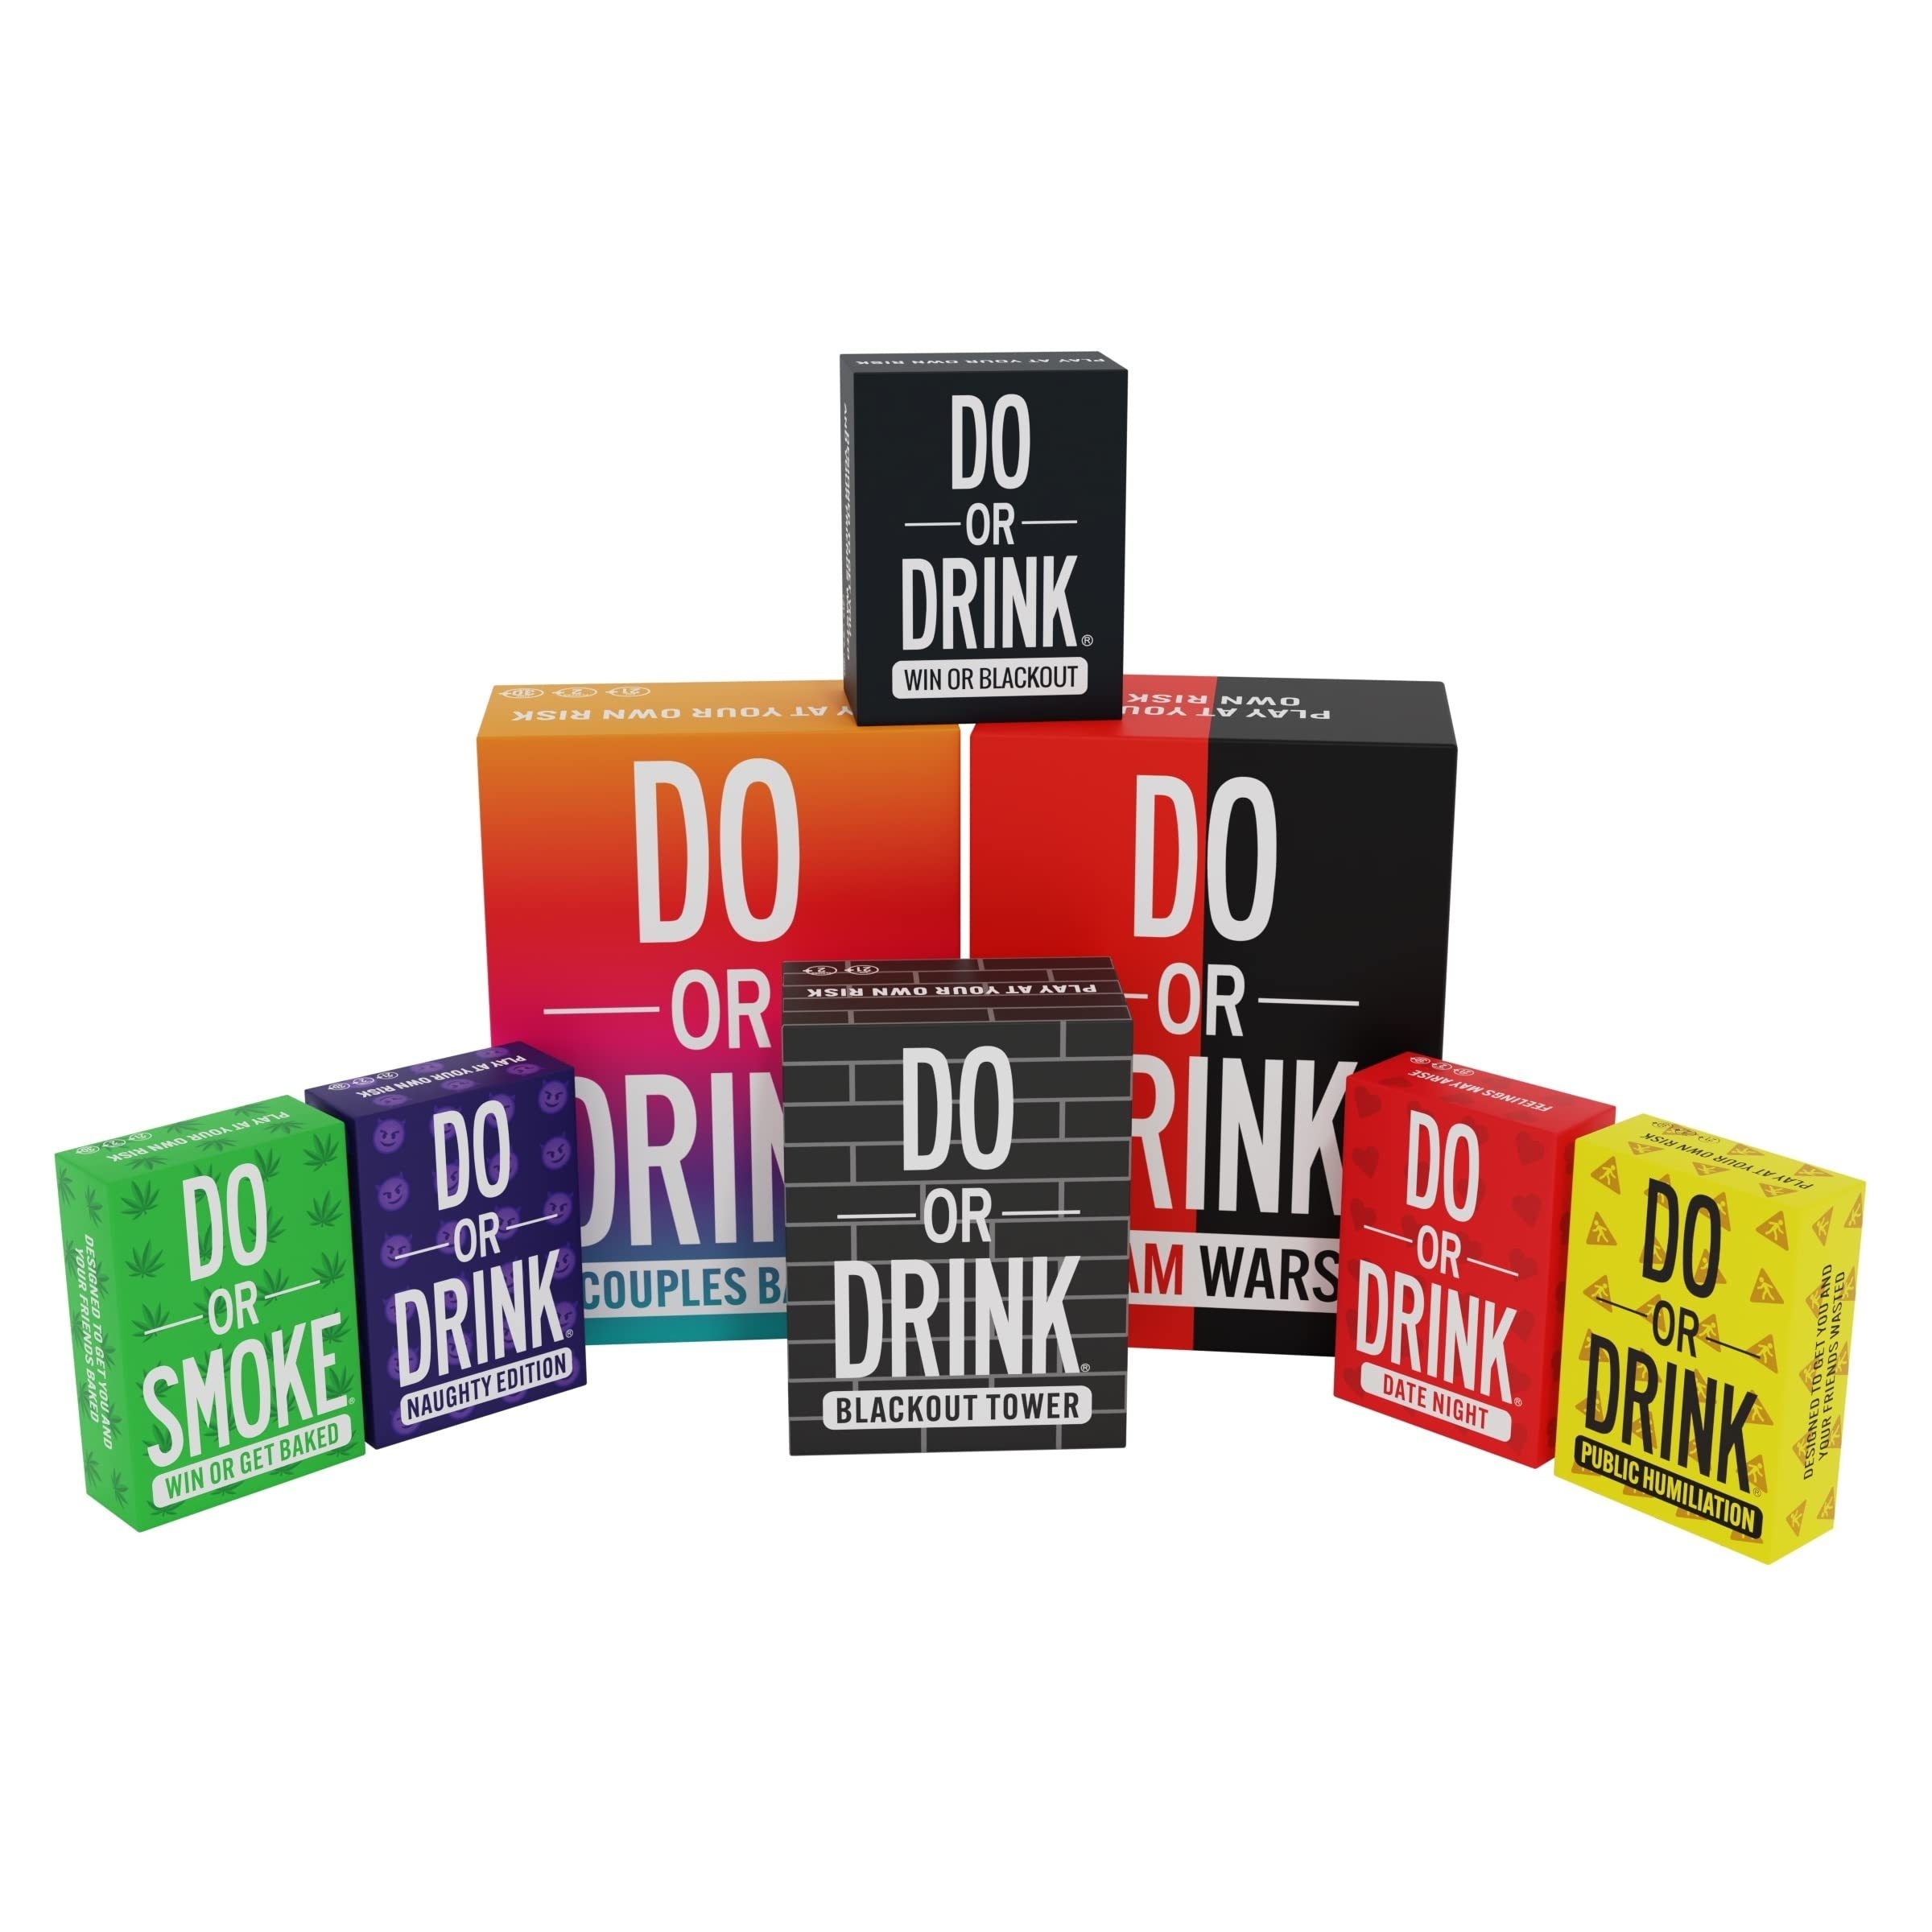 RISK IT or DRINK - Fun Party Game Challenges & Games for Adult Card Parties  7445021185108